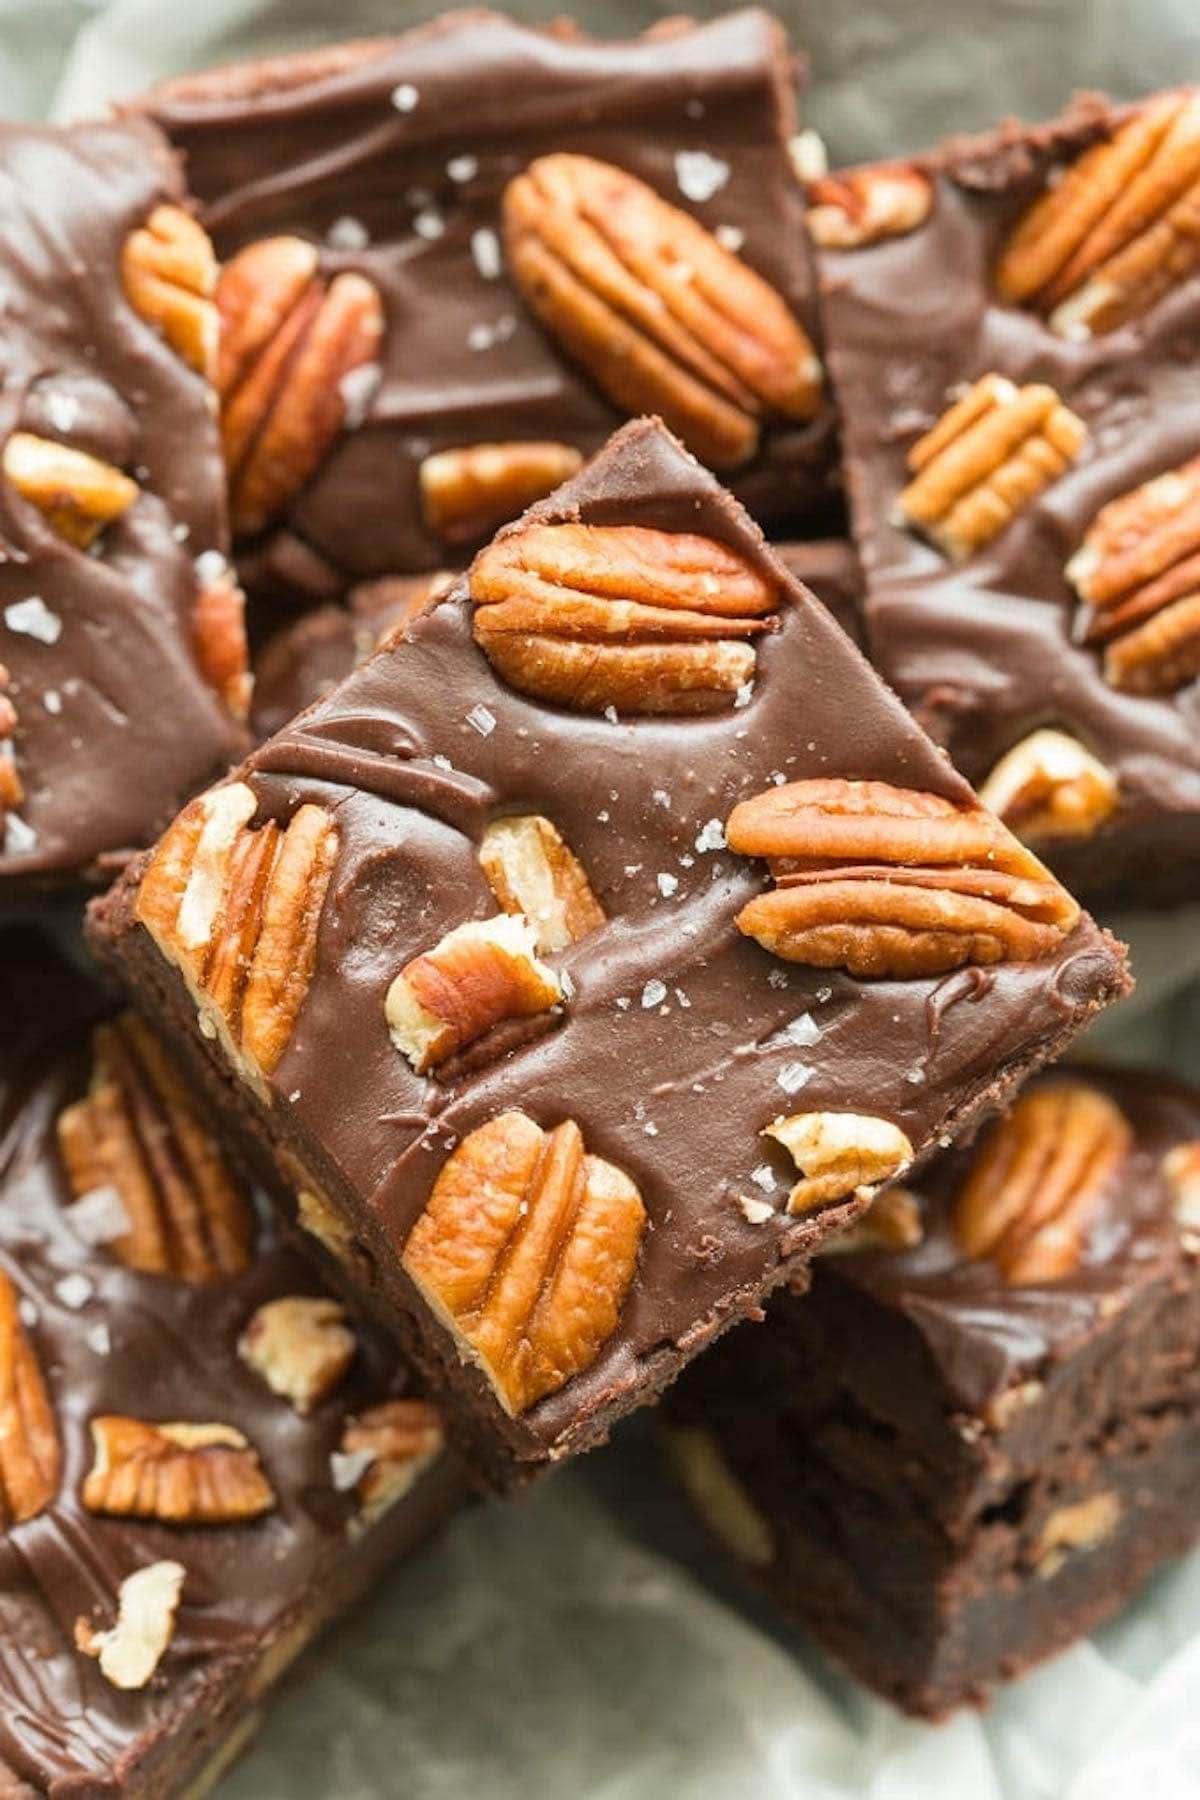 pecan brownie recipe with chocolate frosting and pecans on top.